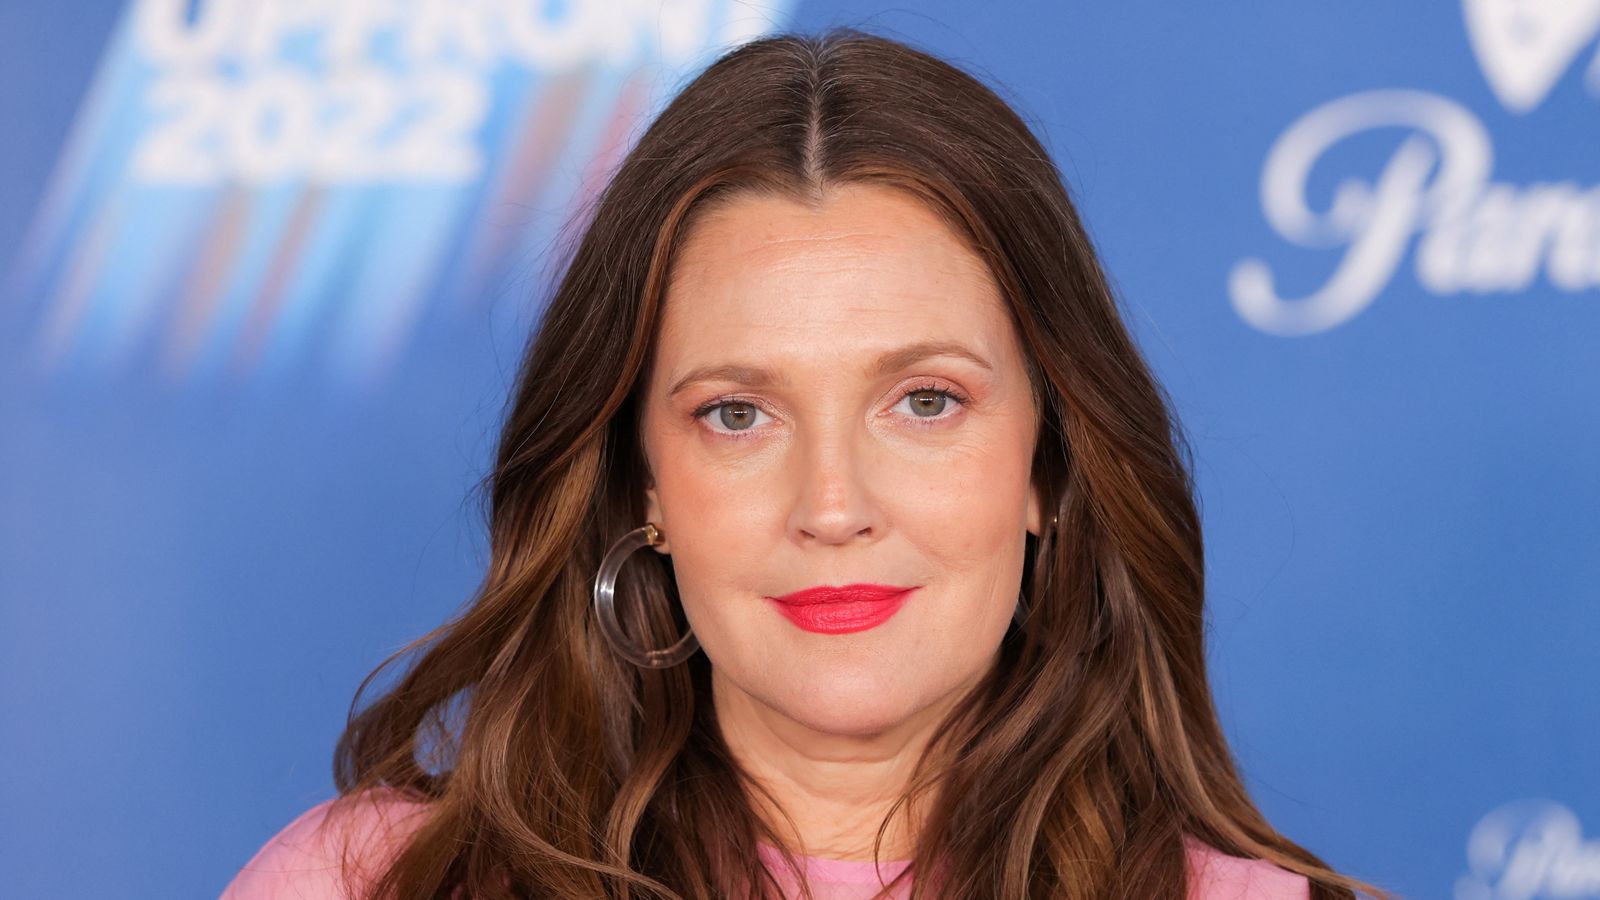 Drew Barrymore apologises for bringing talk show back during Hollywood writers' strike